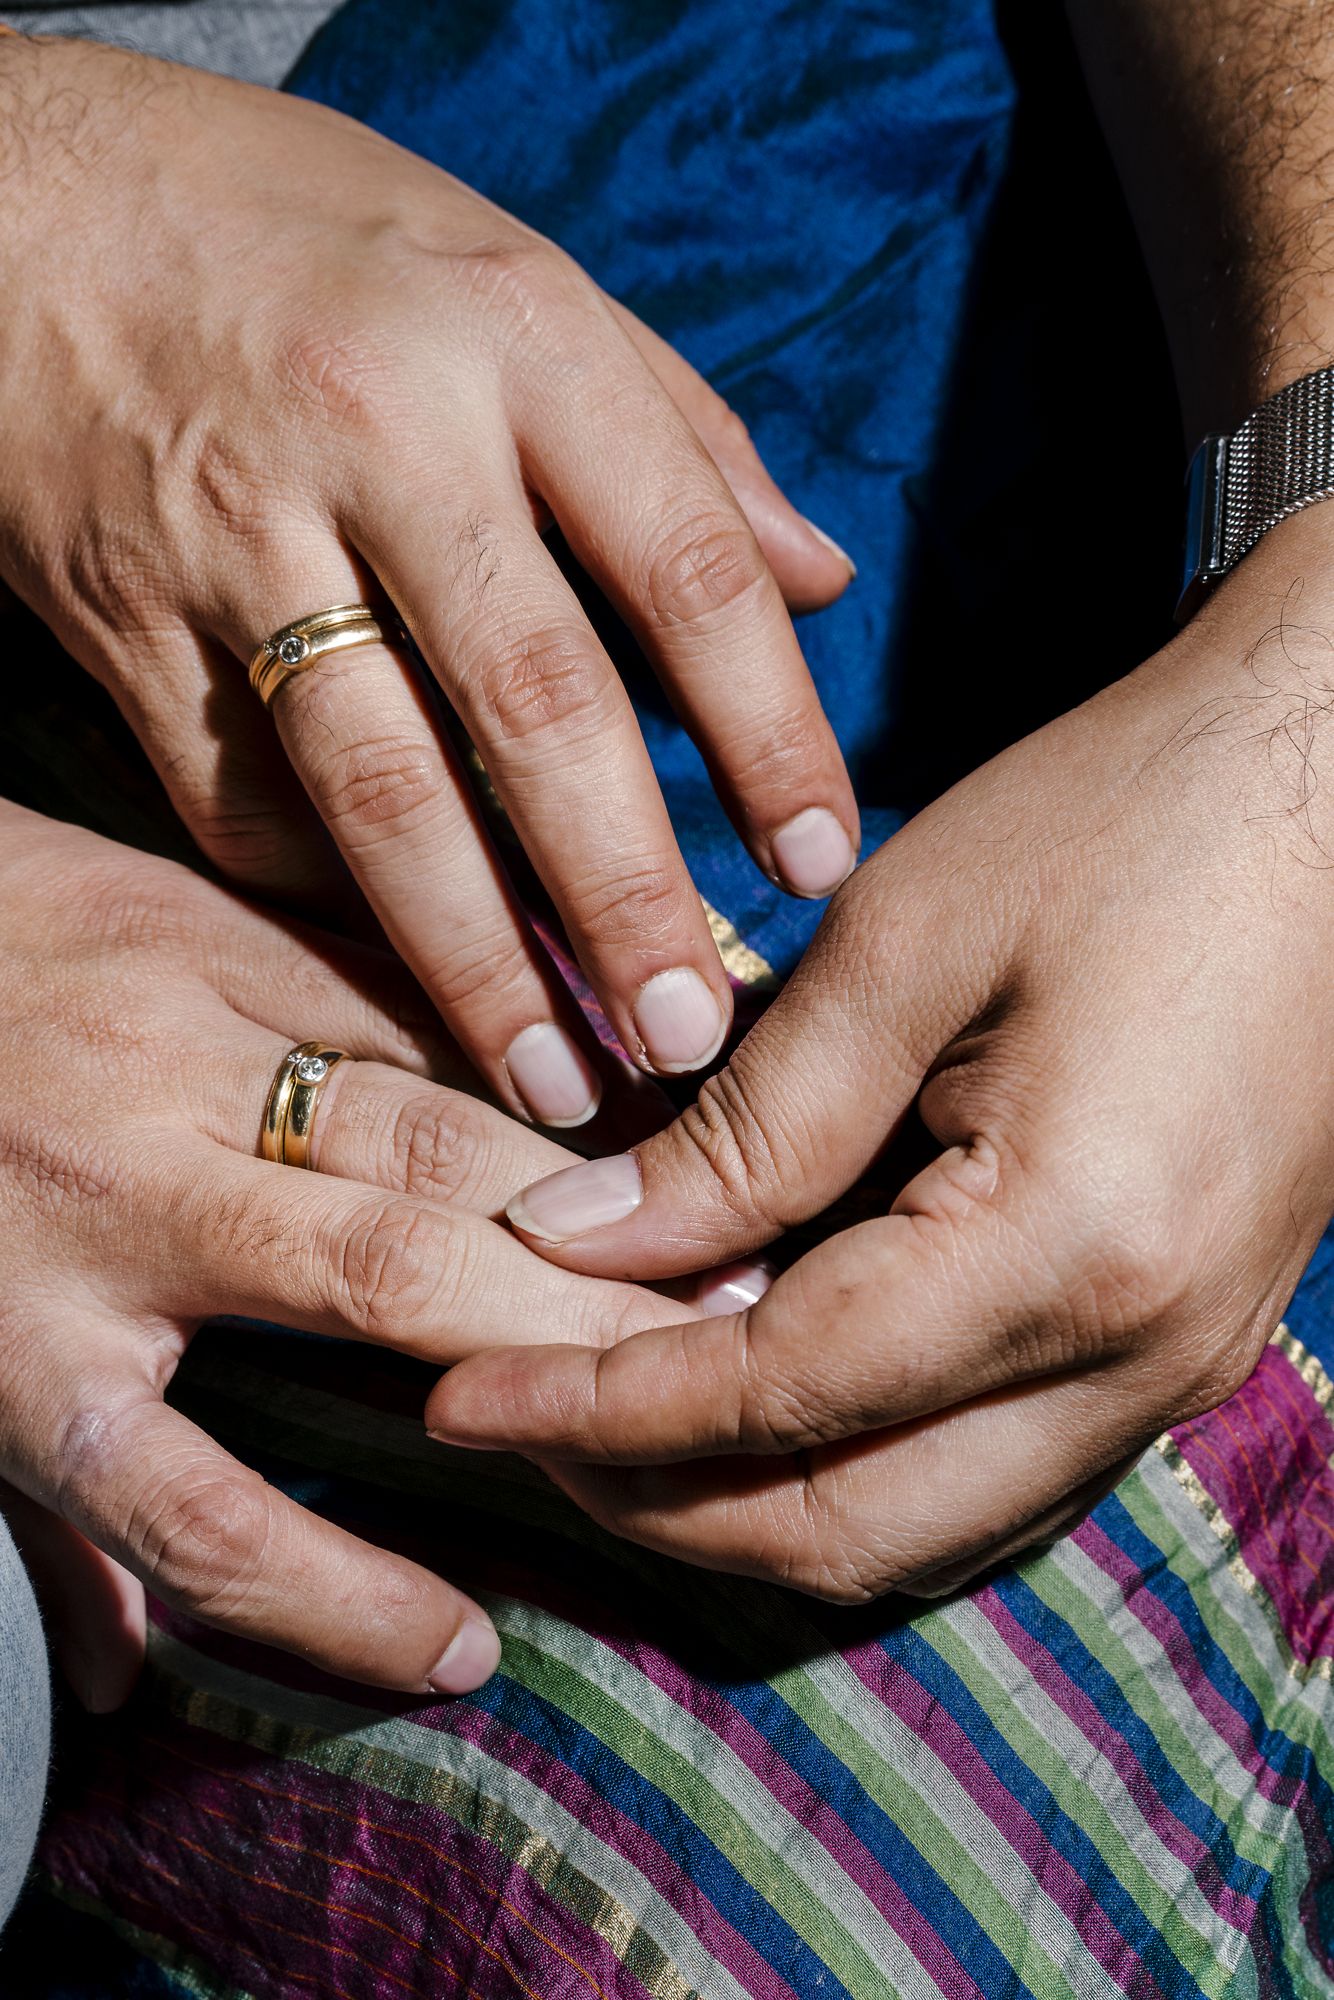 A gay married couple display their wedding rings. They declined to share their names or faces out of fear of how their parents will react when they discover the news. Image by Jake Naughton and Aarti Singh. India, 2018.